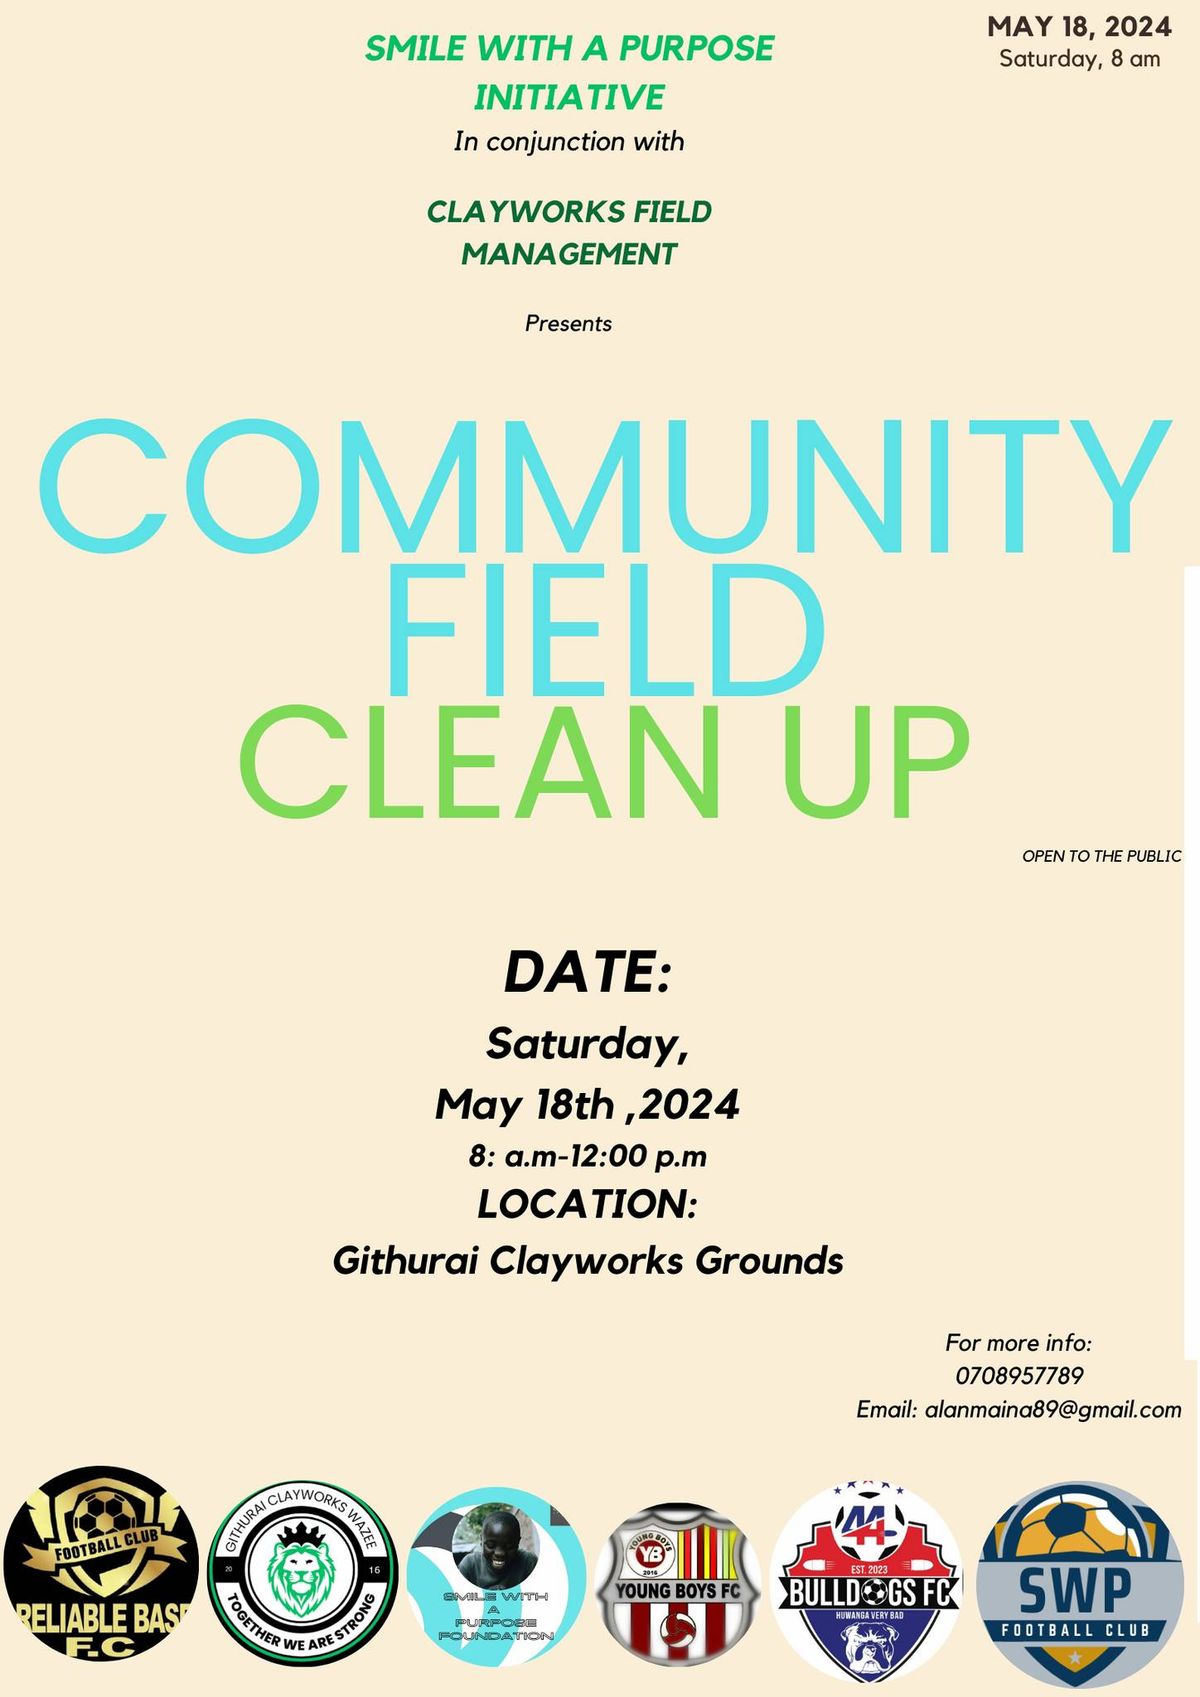 COMMUNITY FIELD CLEAN UP